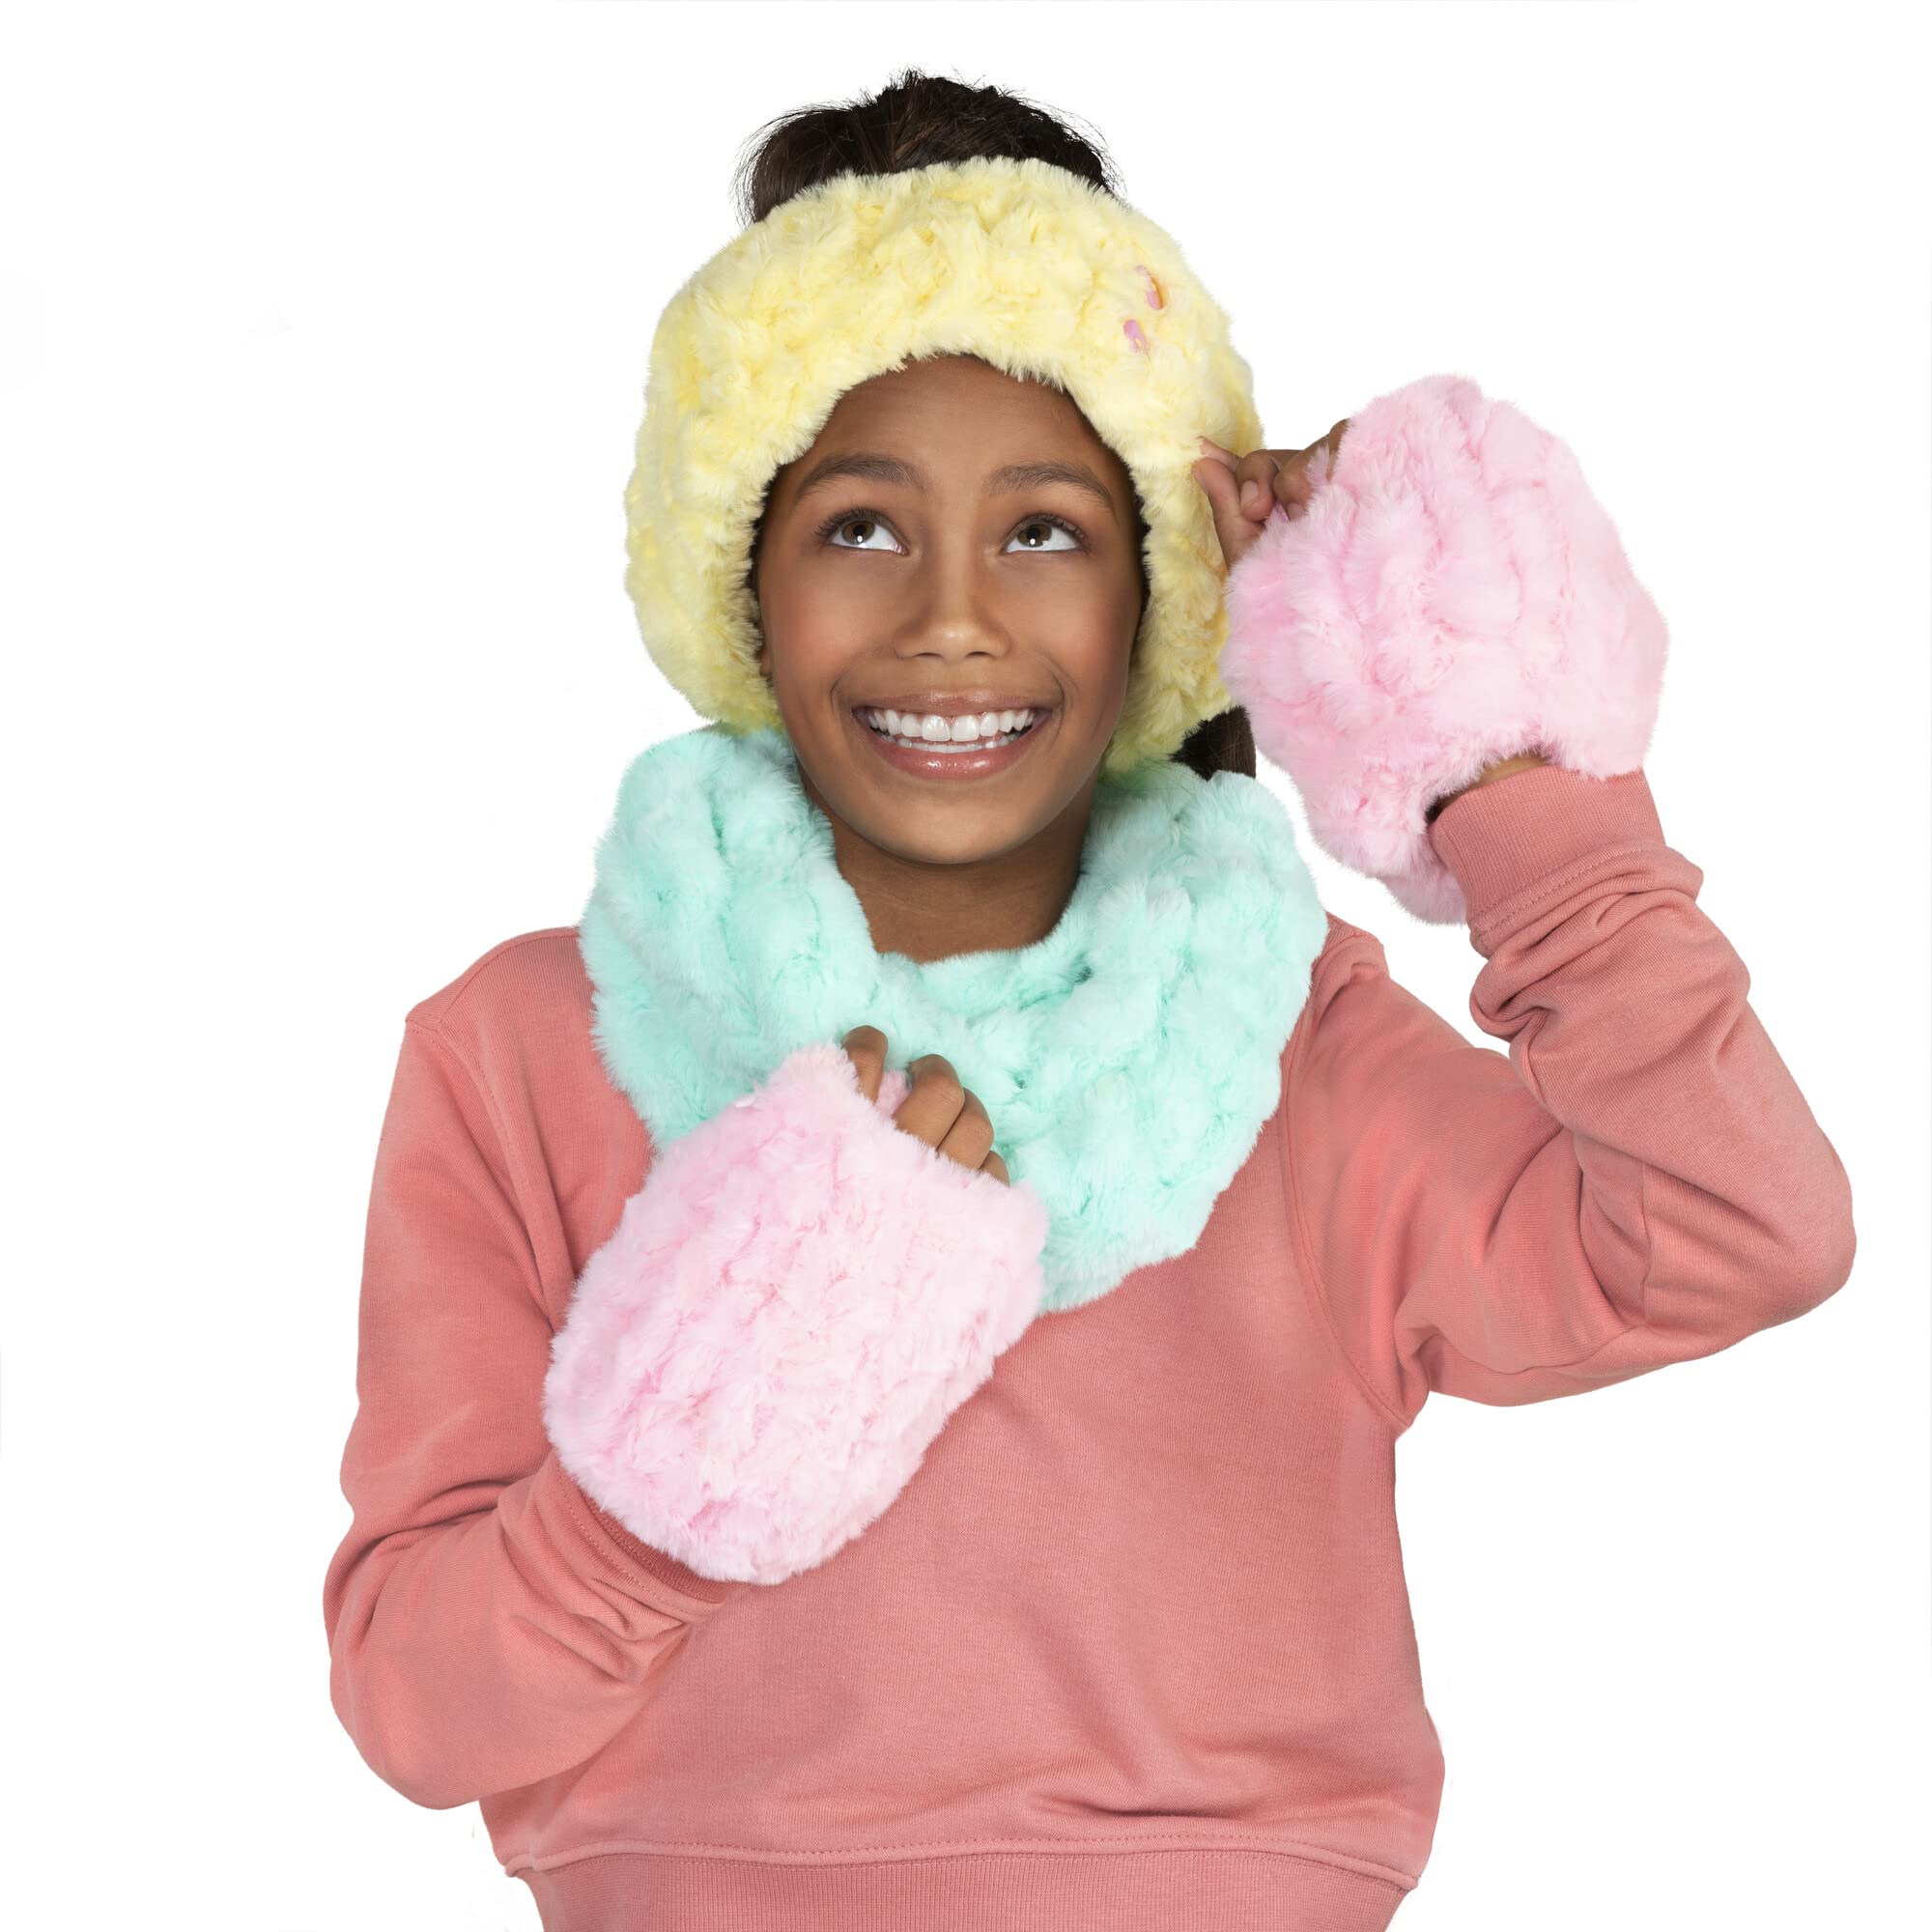 Big Fat Yarn Winter Accessory Kit - Fun DIY All in One Finger Knitting Kit - Level 1: Beginner, Arts and Crafts for Kids Teens Tweens and Adults - 6 Project Ideas - Ages 6+